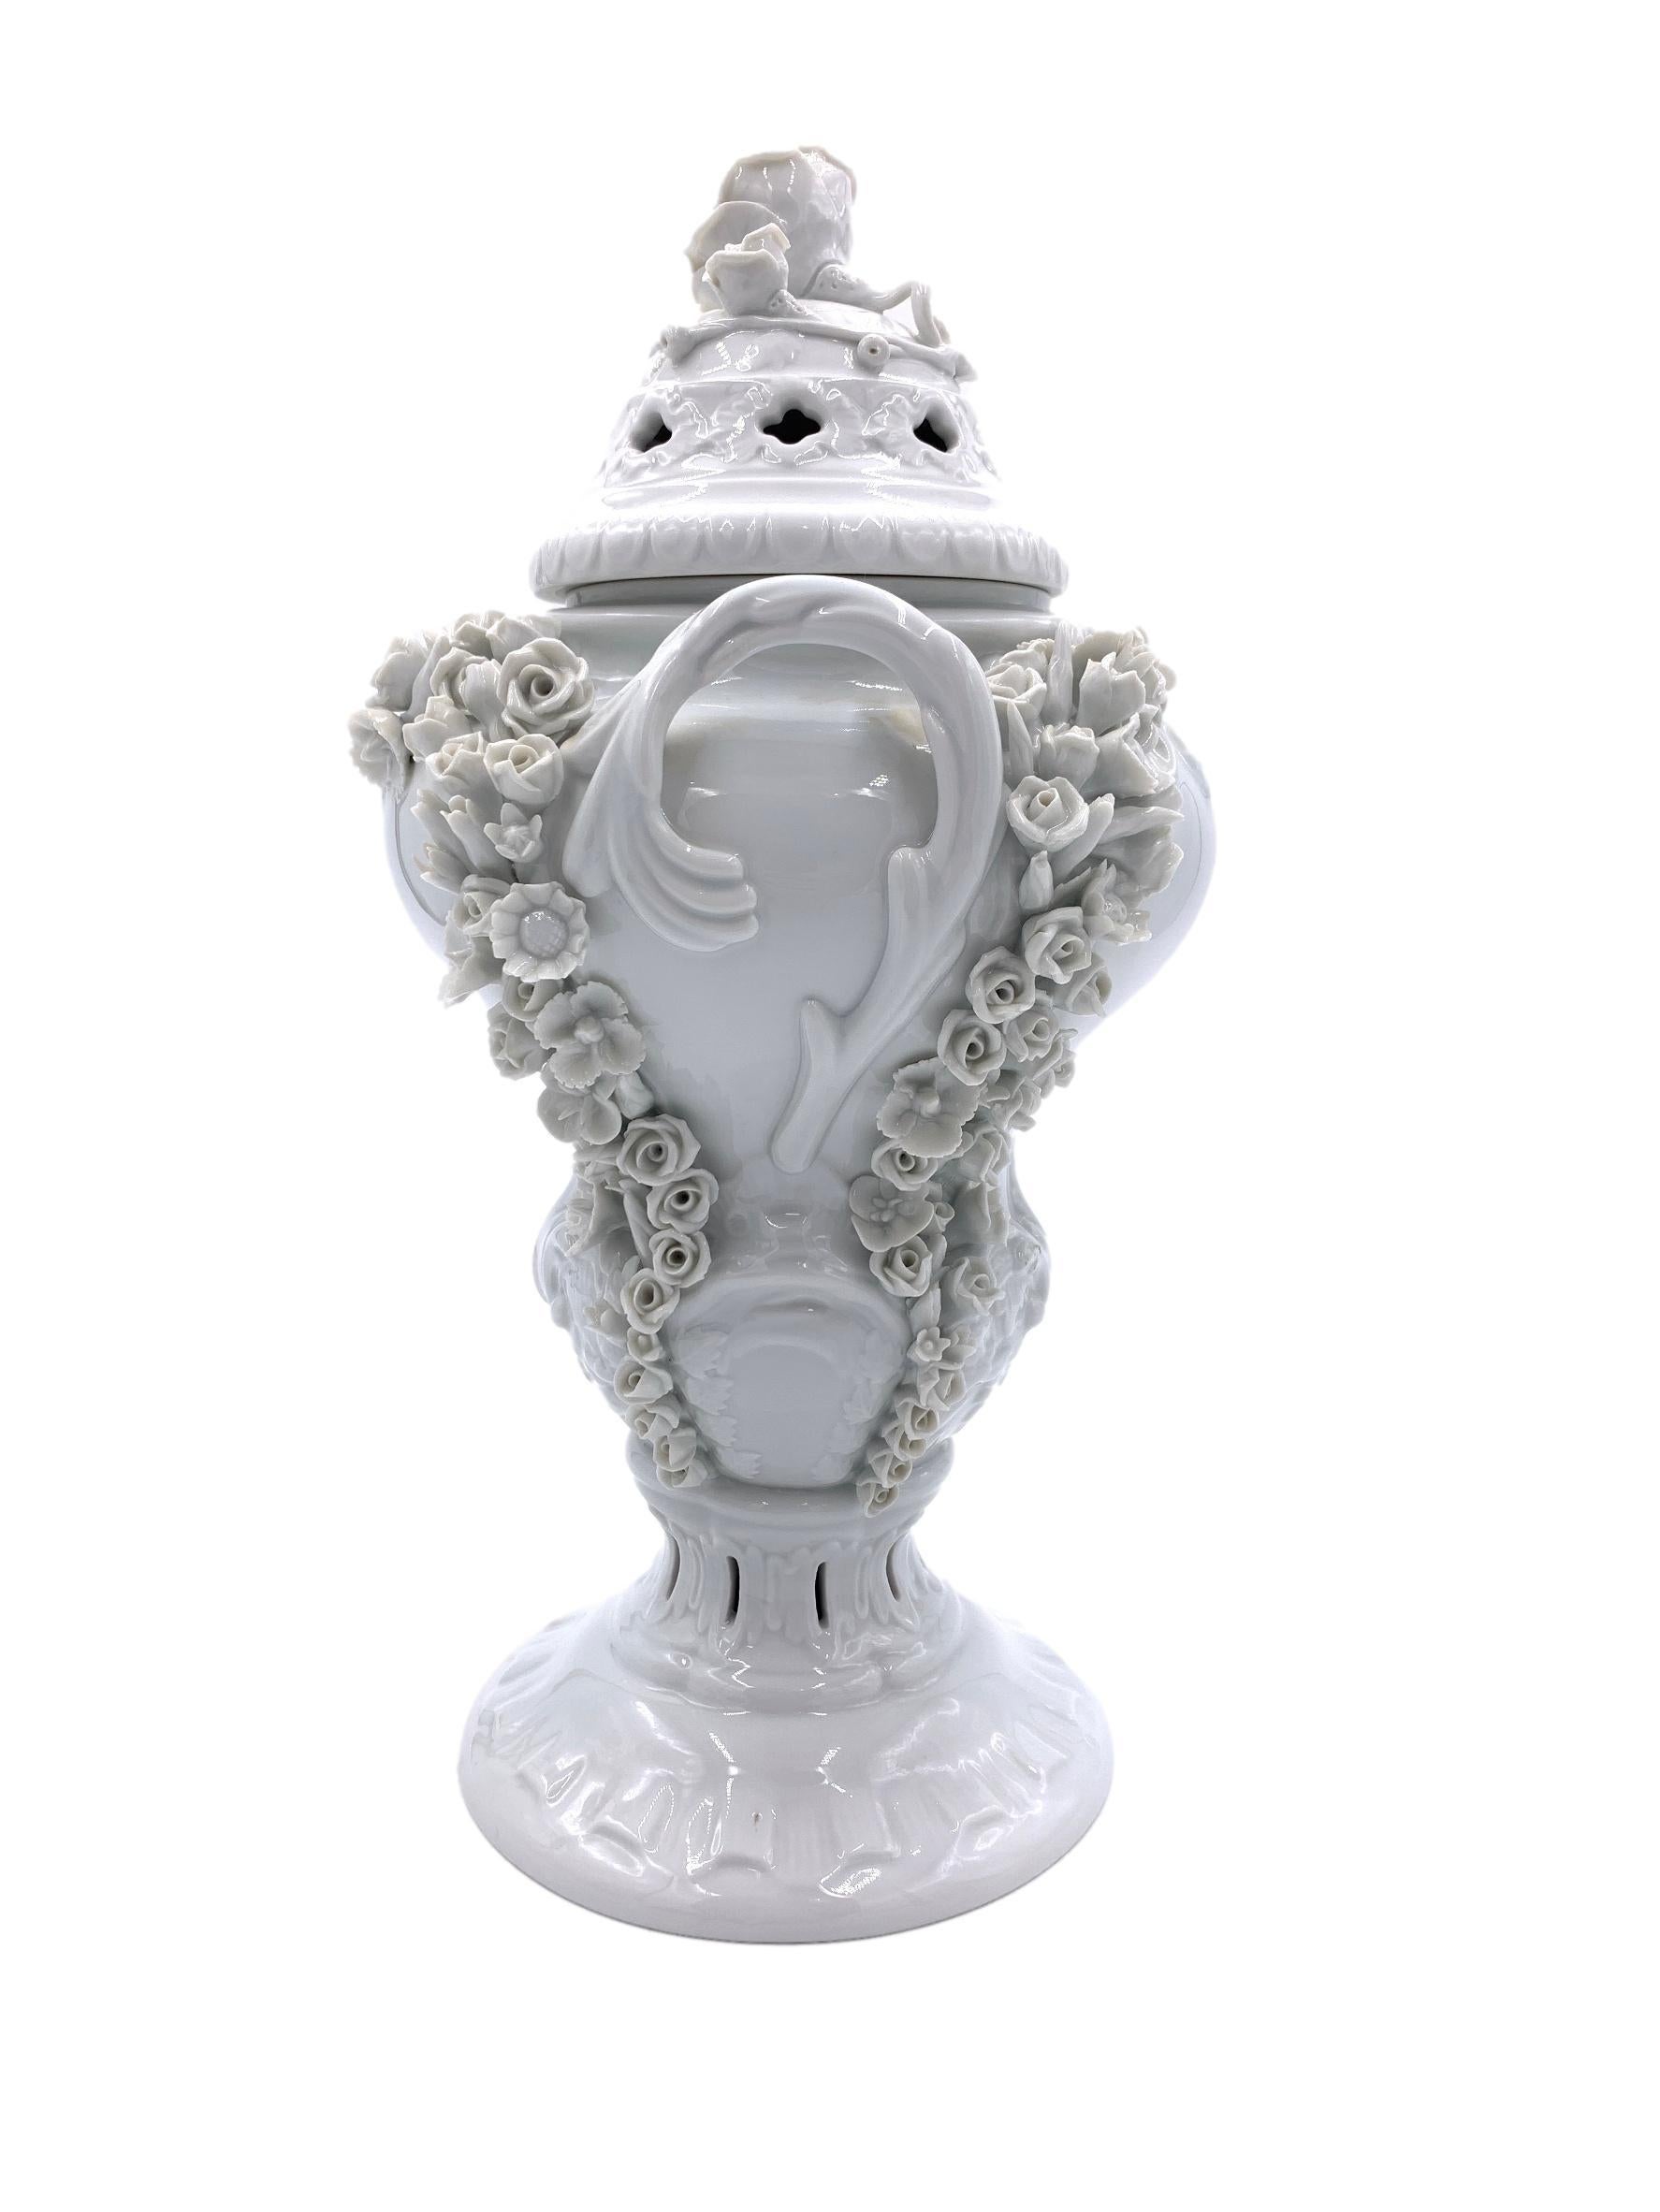 A fine Hungarian 20th century porcelain urn decorated with roses, marked HEREND at the base.
 